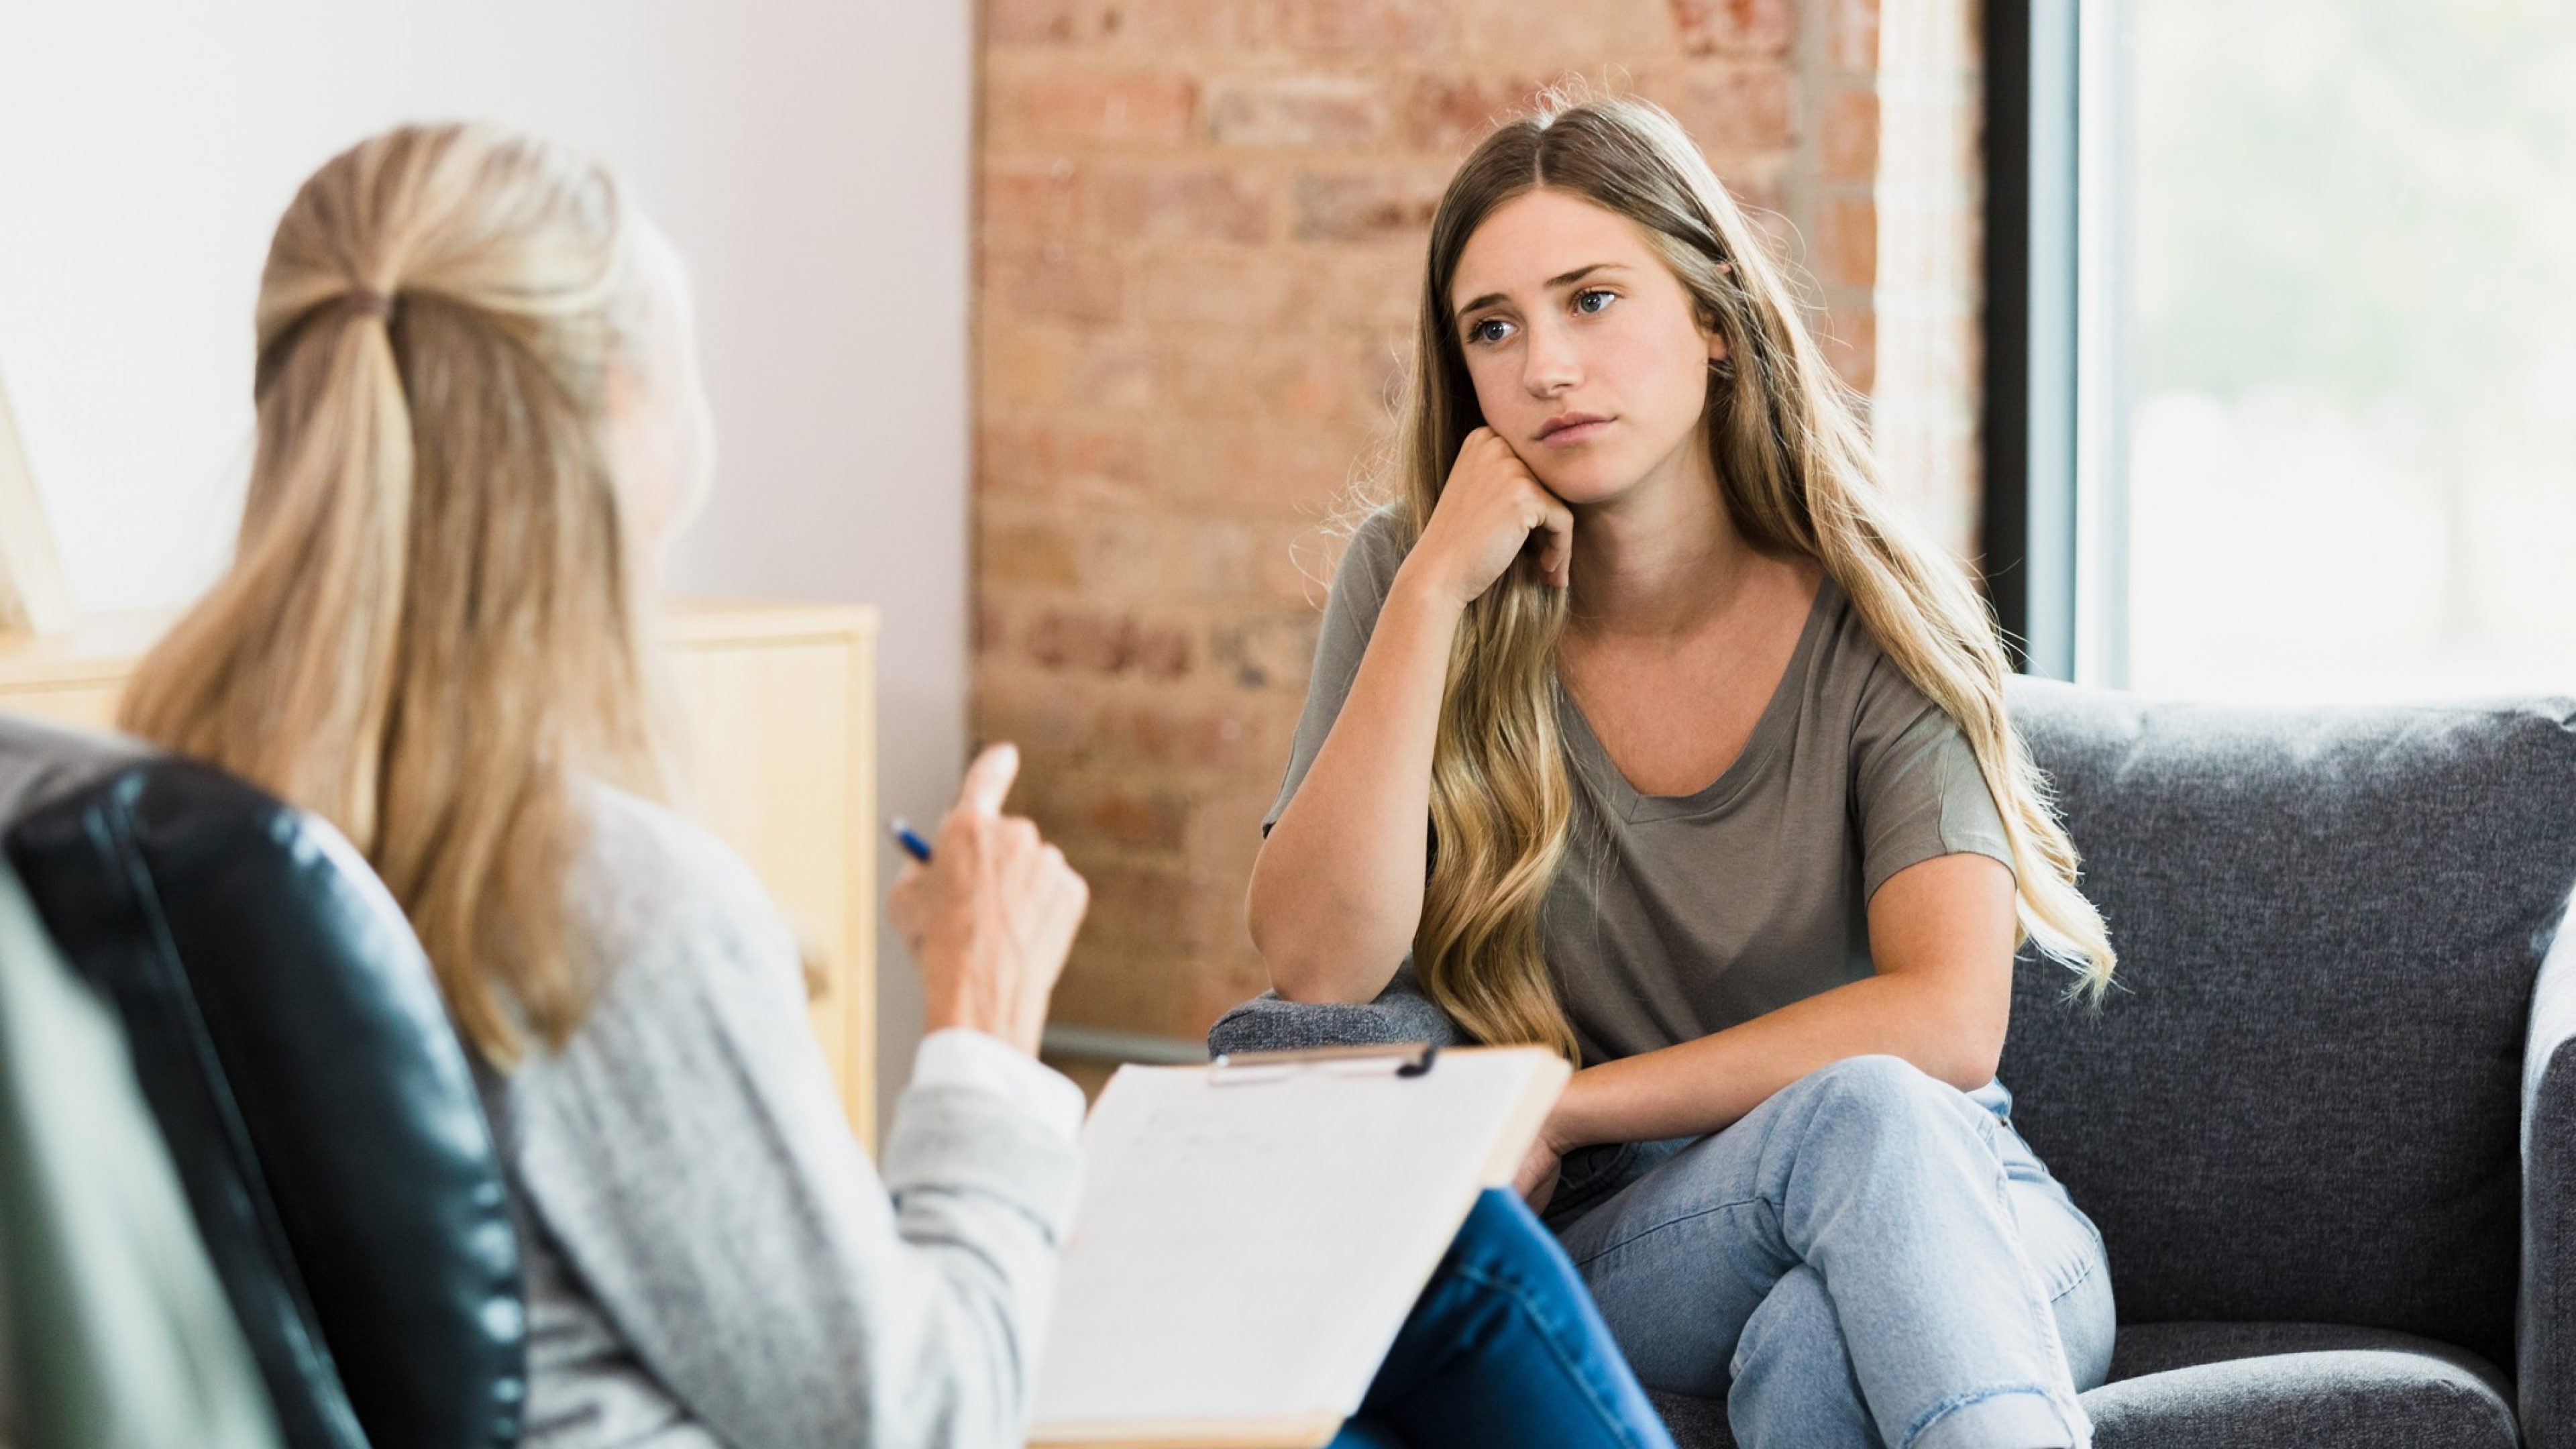 The teenage girl sits hopelessly with her head resting on her hand as she listens to advice from the unrecognizable mature adult female counselor.